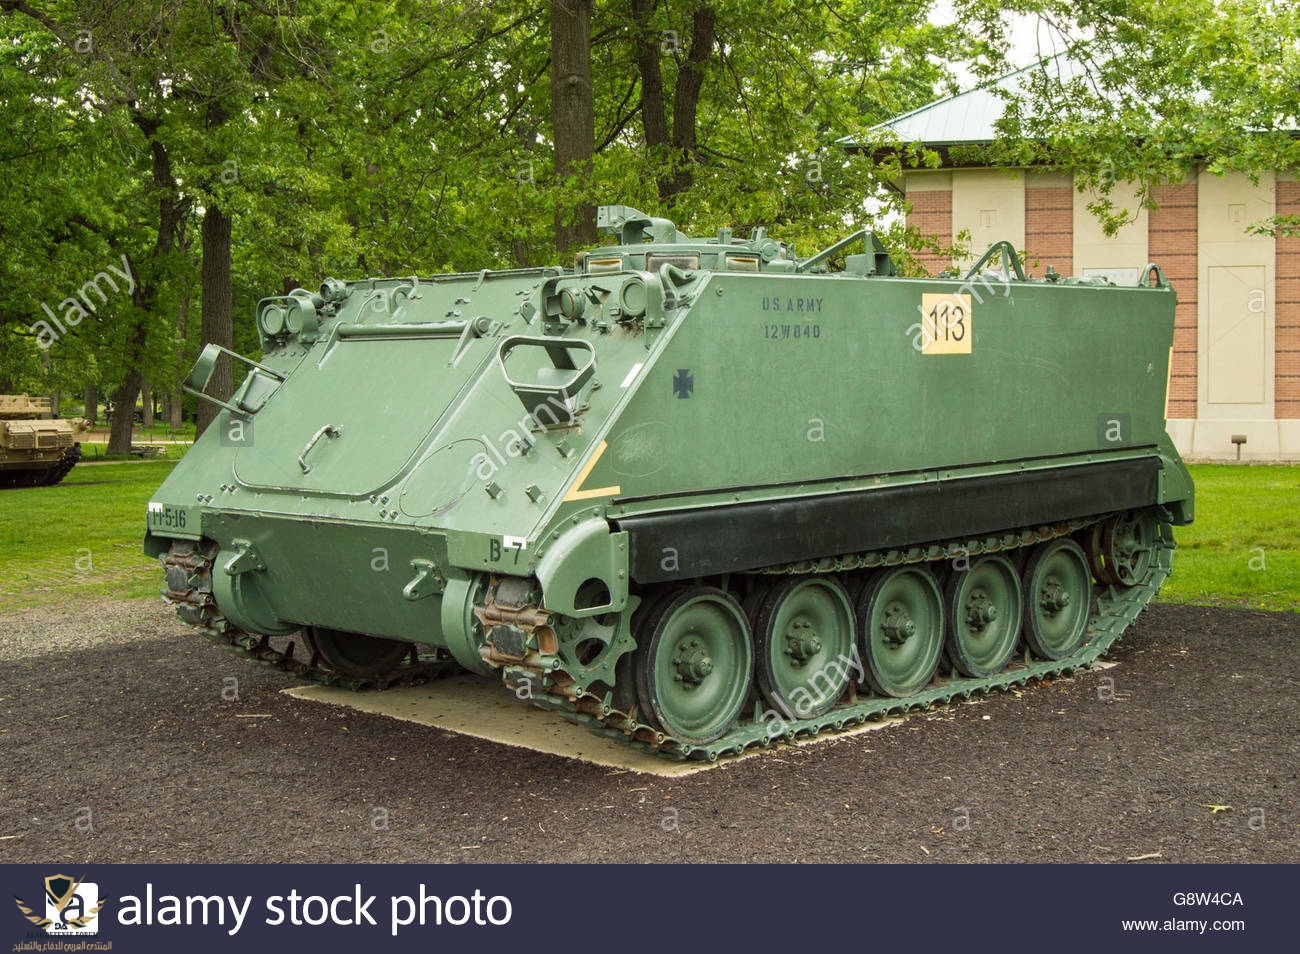 m113-armored-personnel-carrier-apc-G8W4CA.jpg